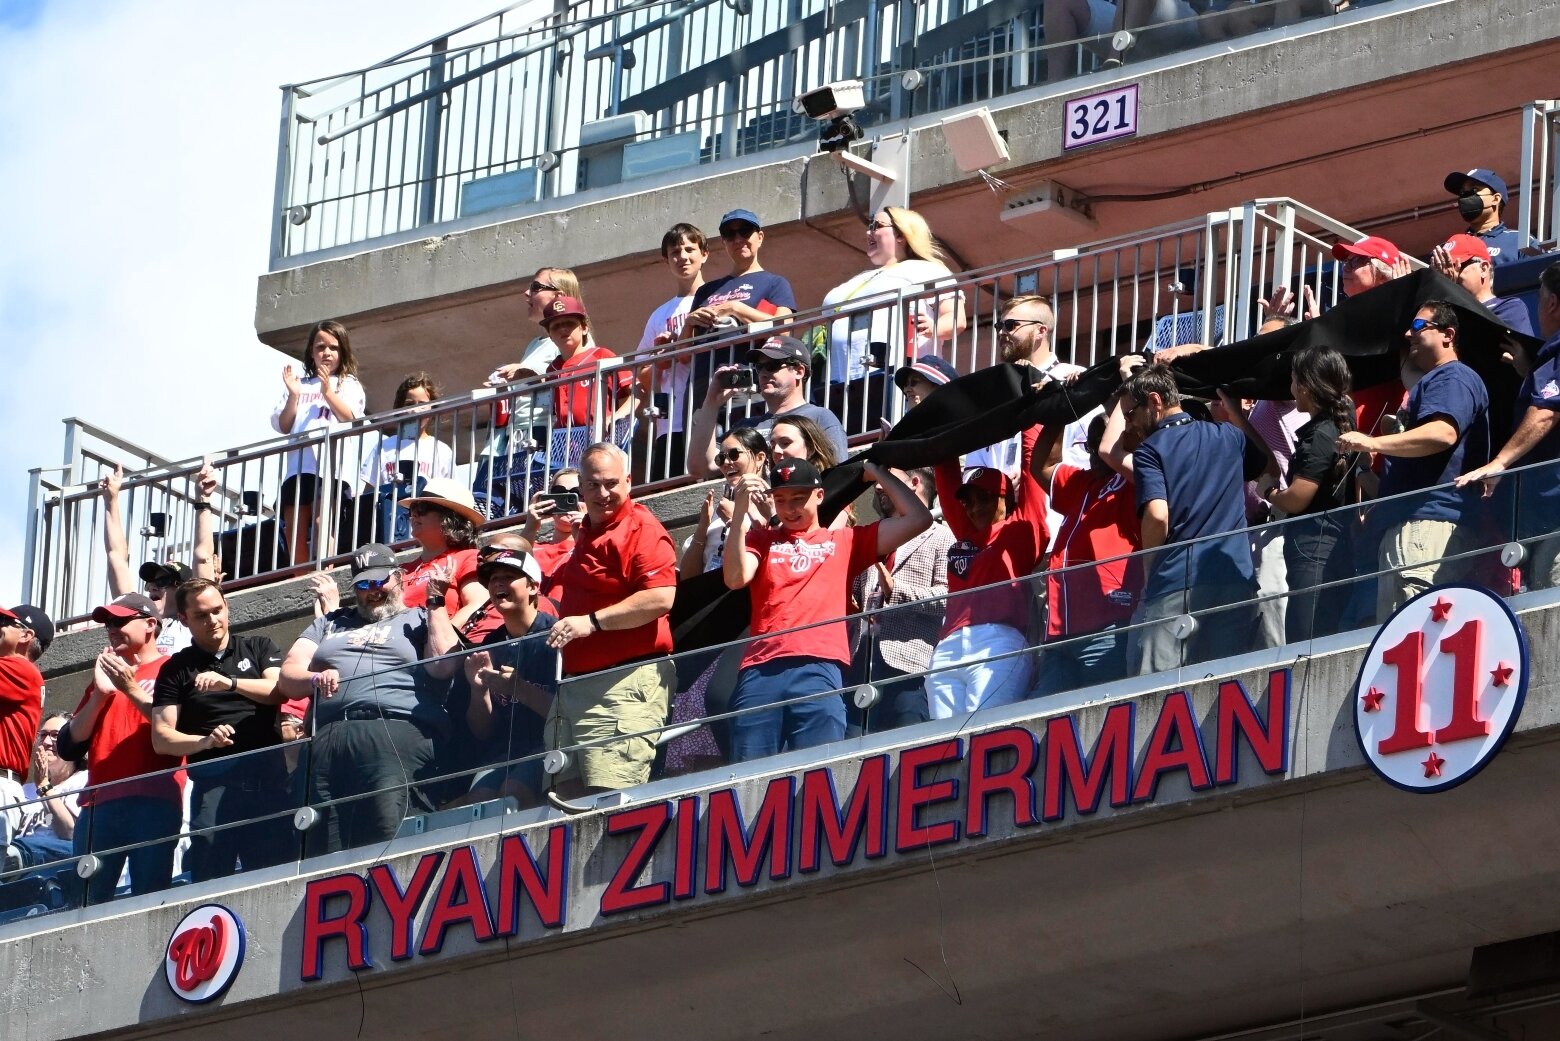 Ryan Zimmerman retirement ceremony last time some one on the